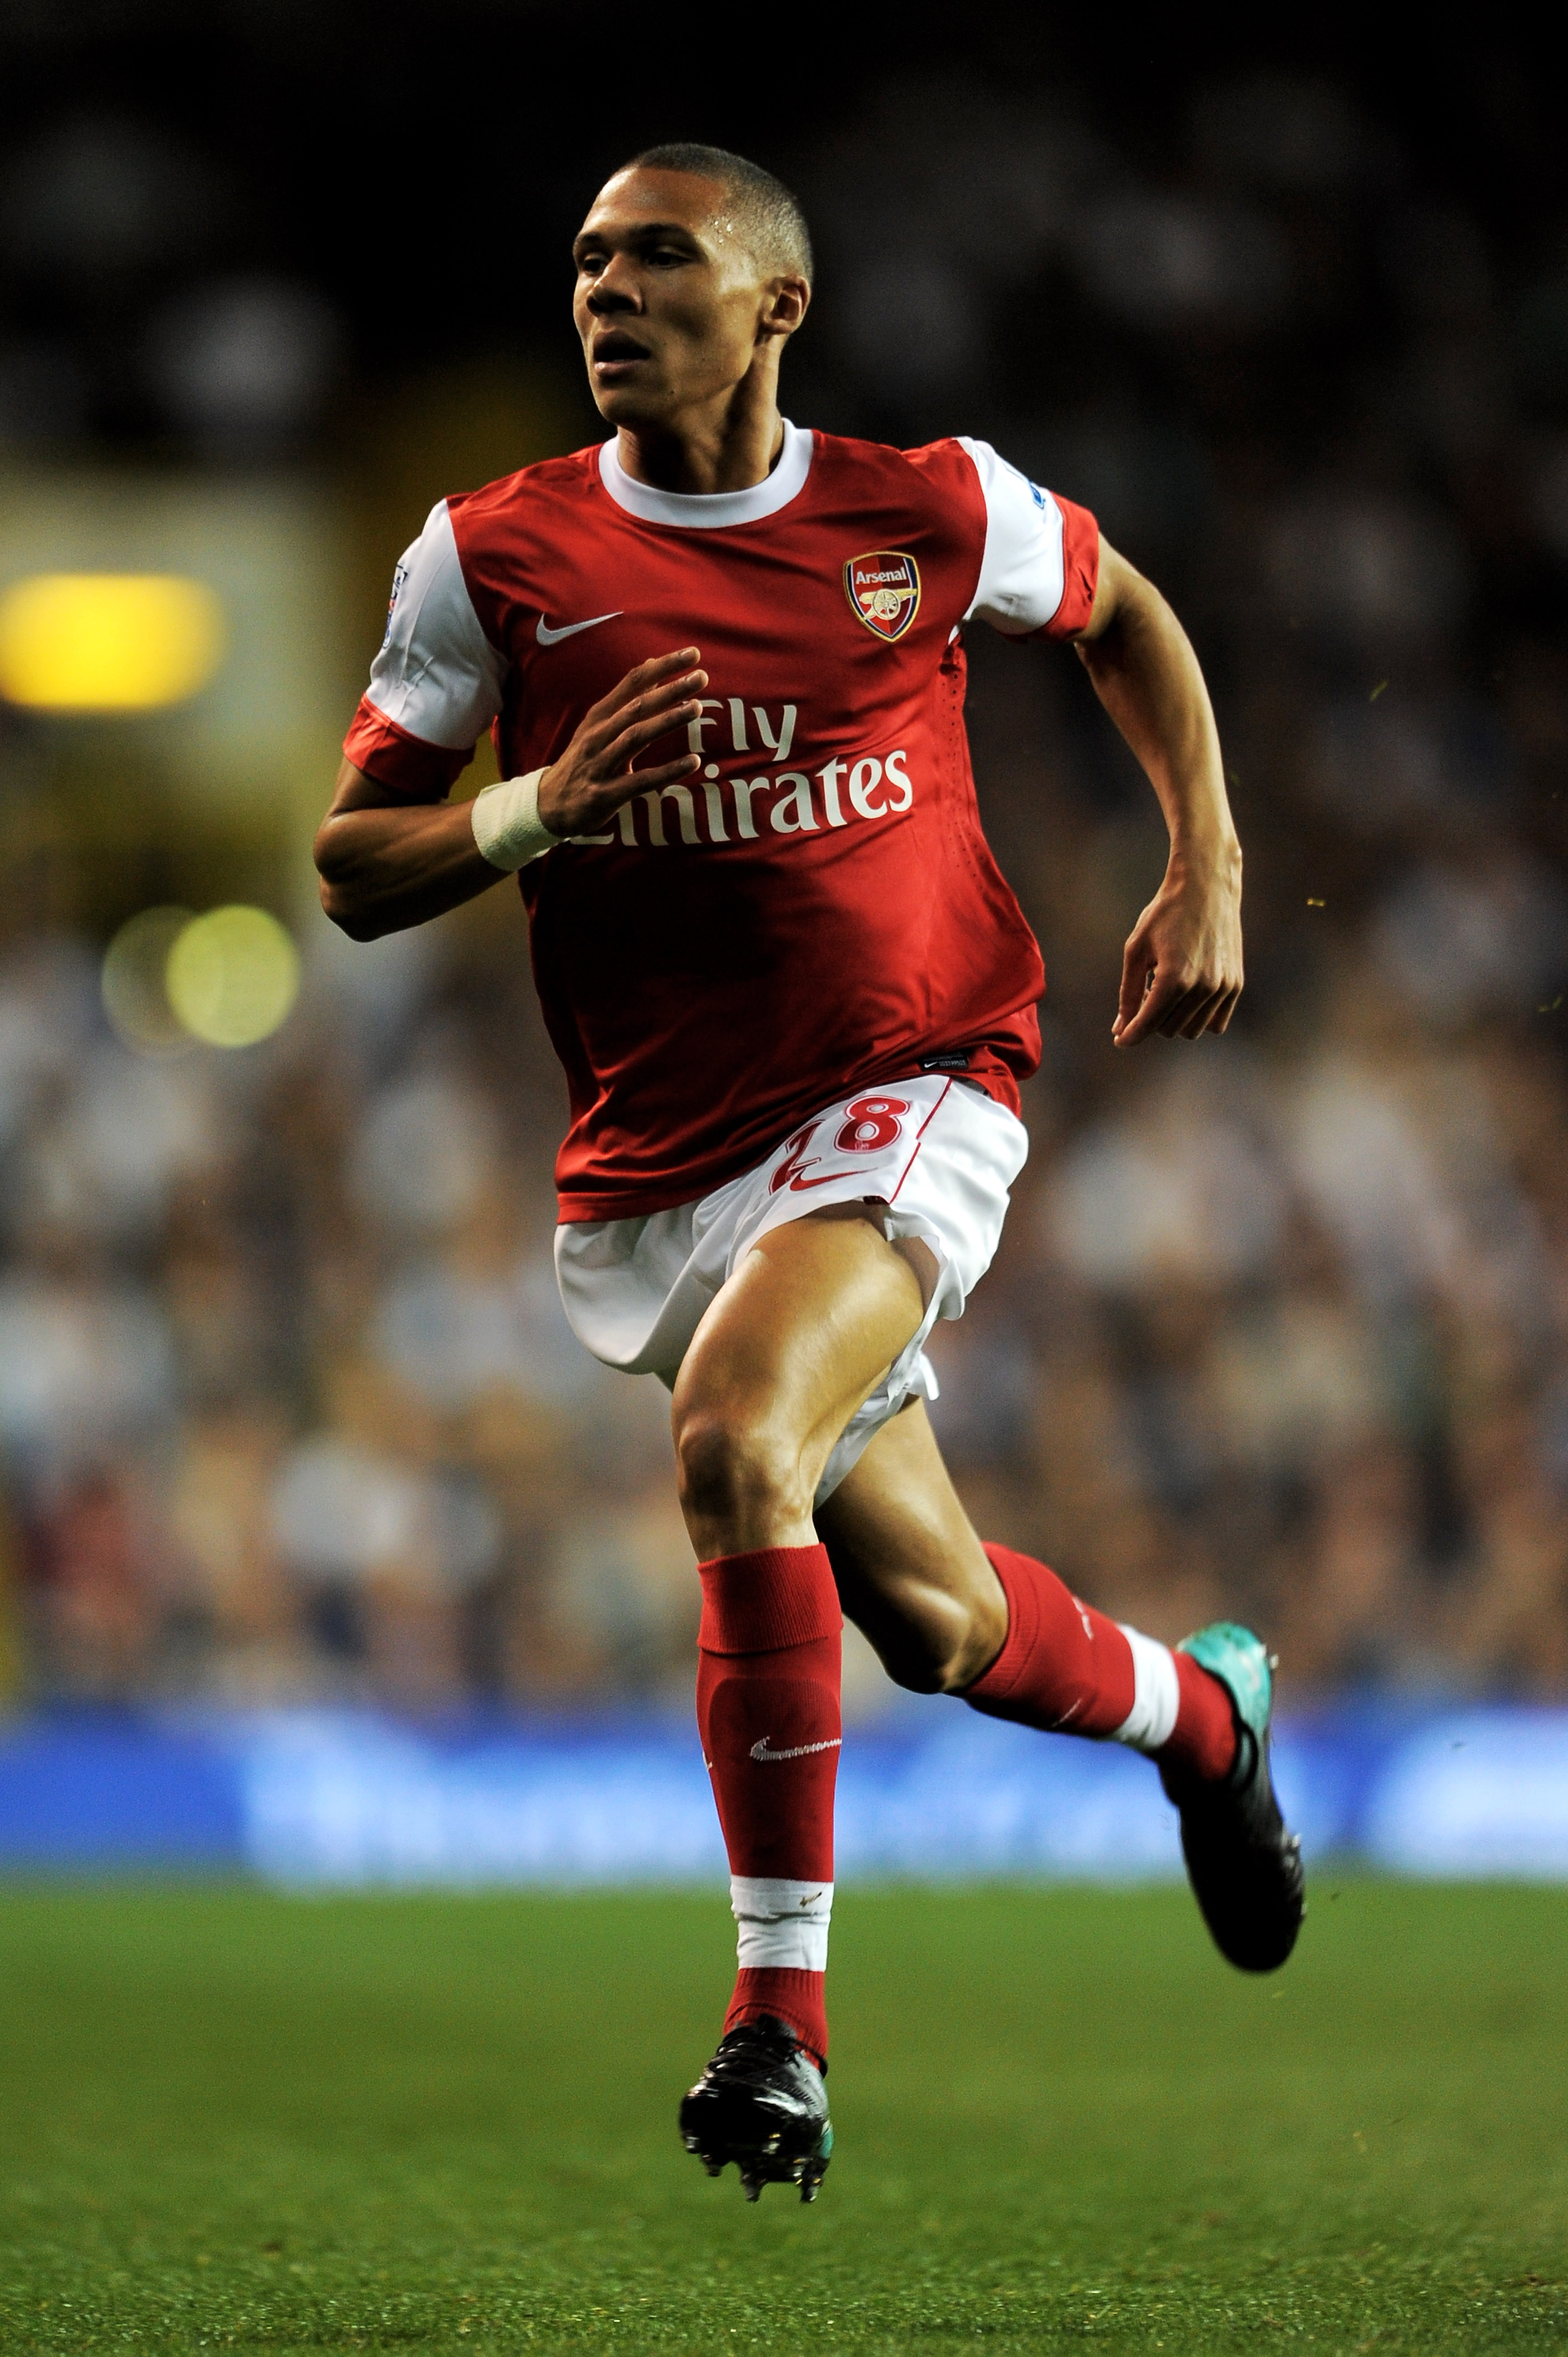 LONDON, ENGLAND - SEPTEMBER 21:  Kieran Gibbs of Arsenal in action during the Carling Cup third round match between Tottenham Hotspur and Arsenal at White Hart Lane on September 21, 2010 in London, England.  (Photo by Michael Regan/Getty Images)